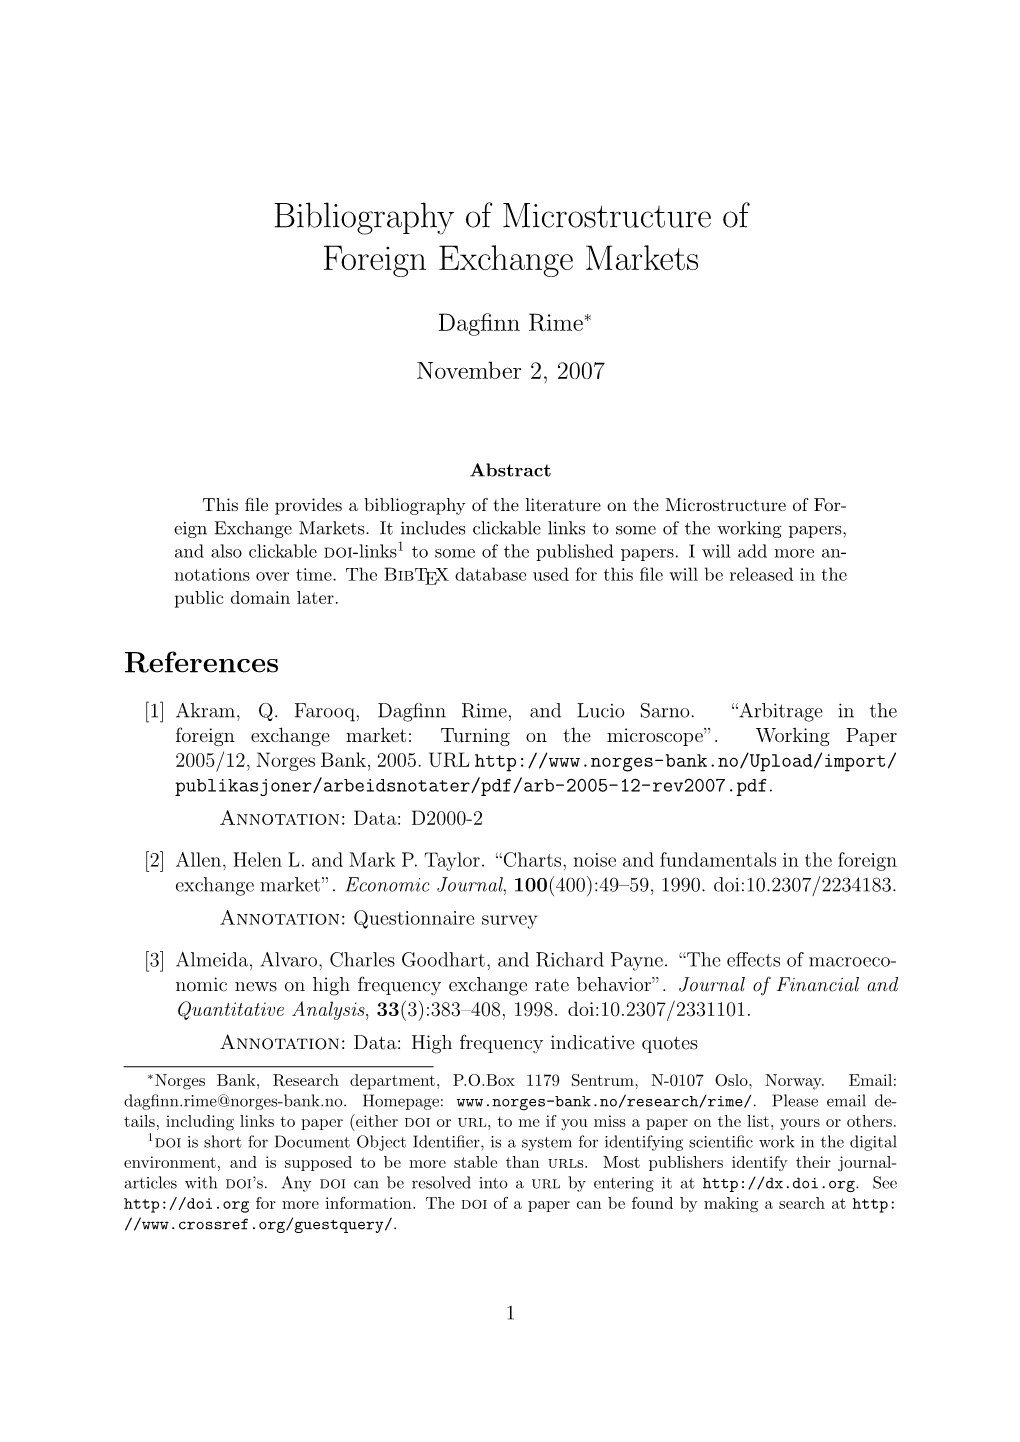 Bibliography of Microstructure of Foreign Exchange Markets